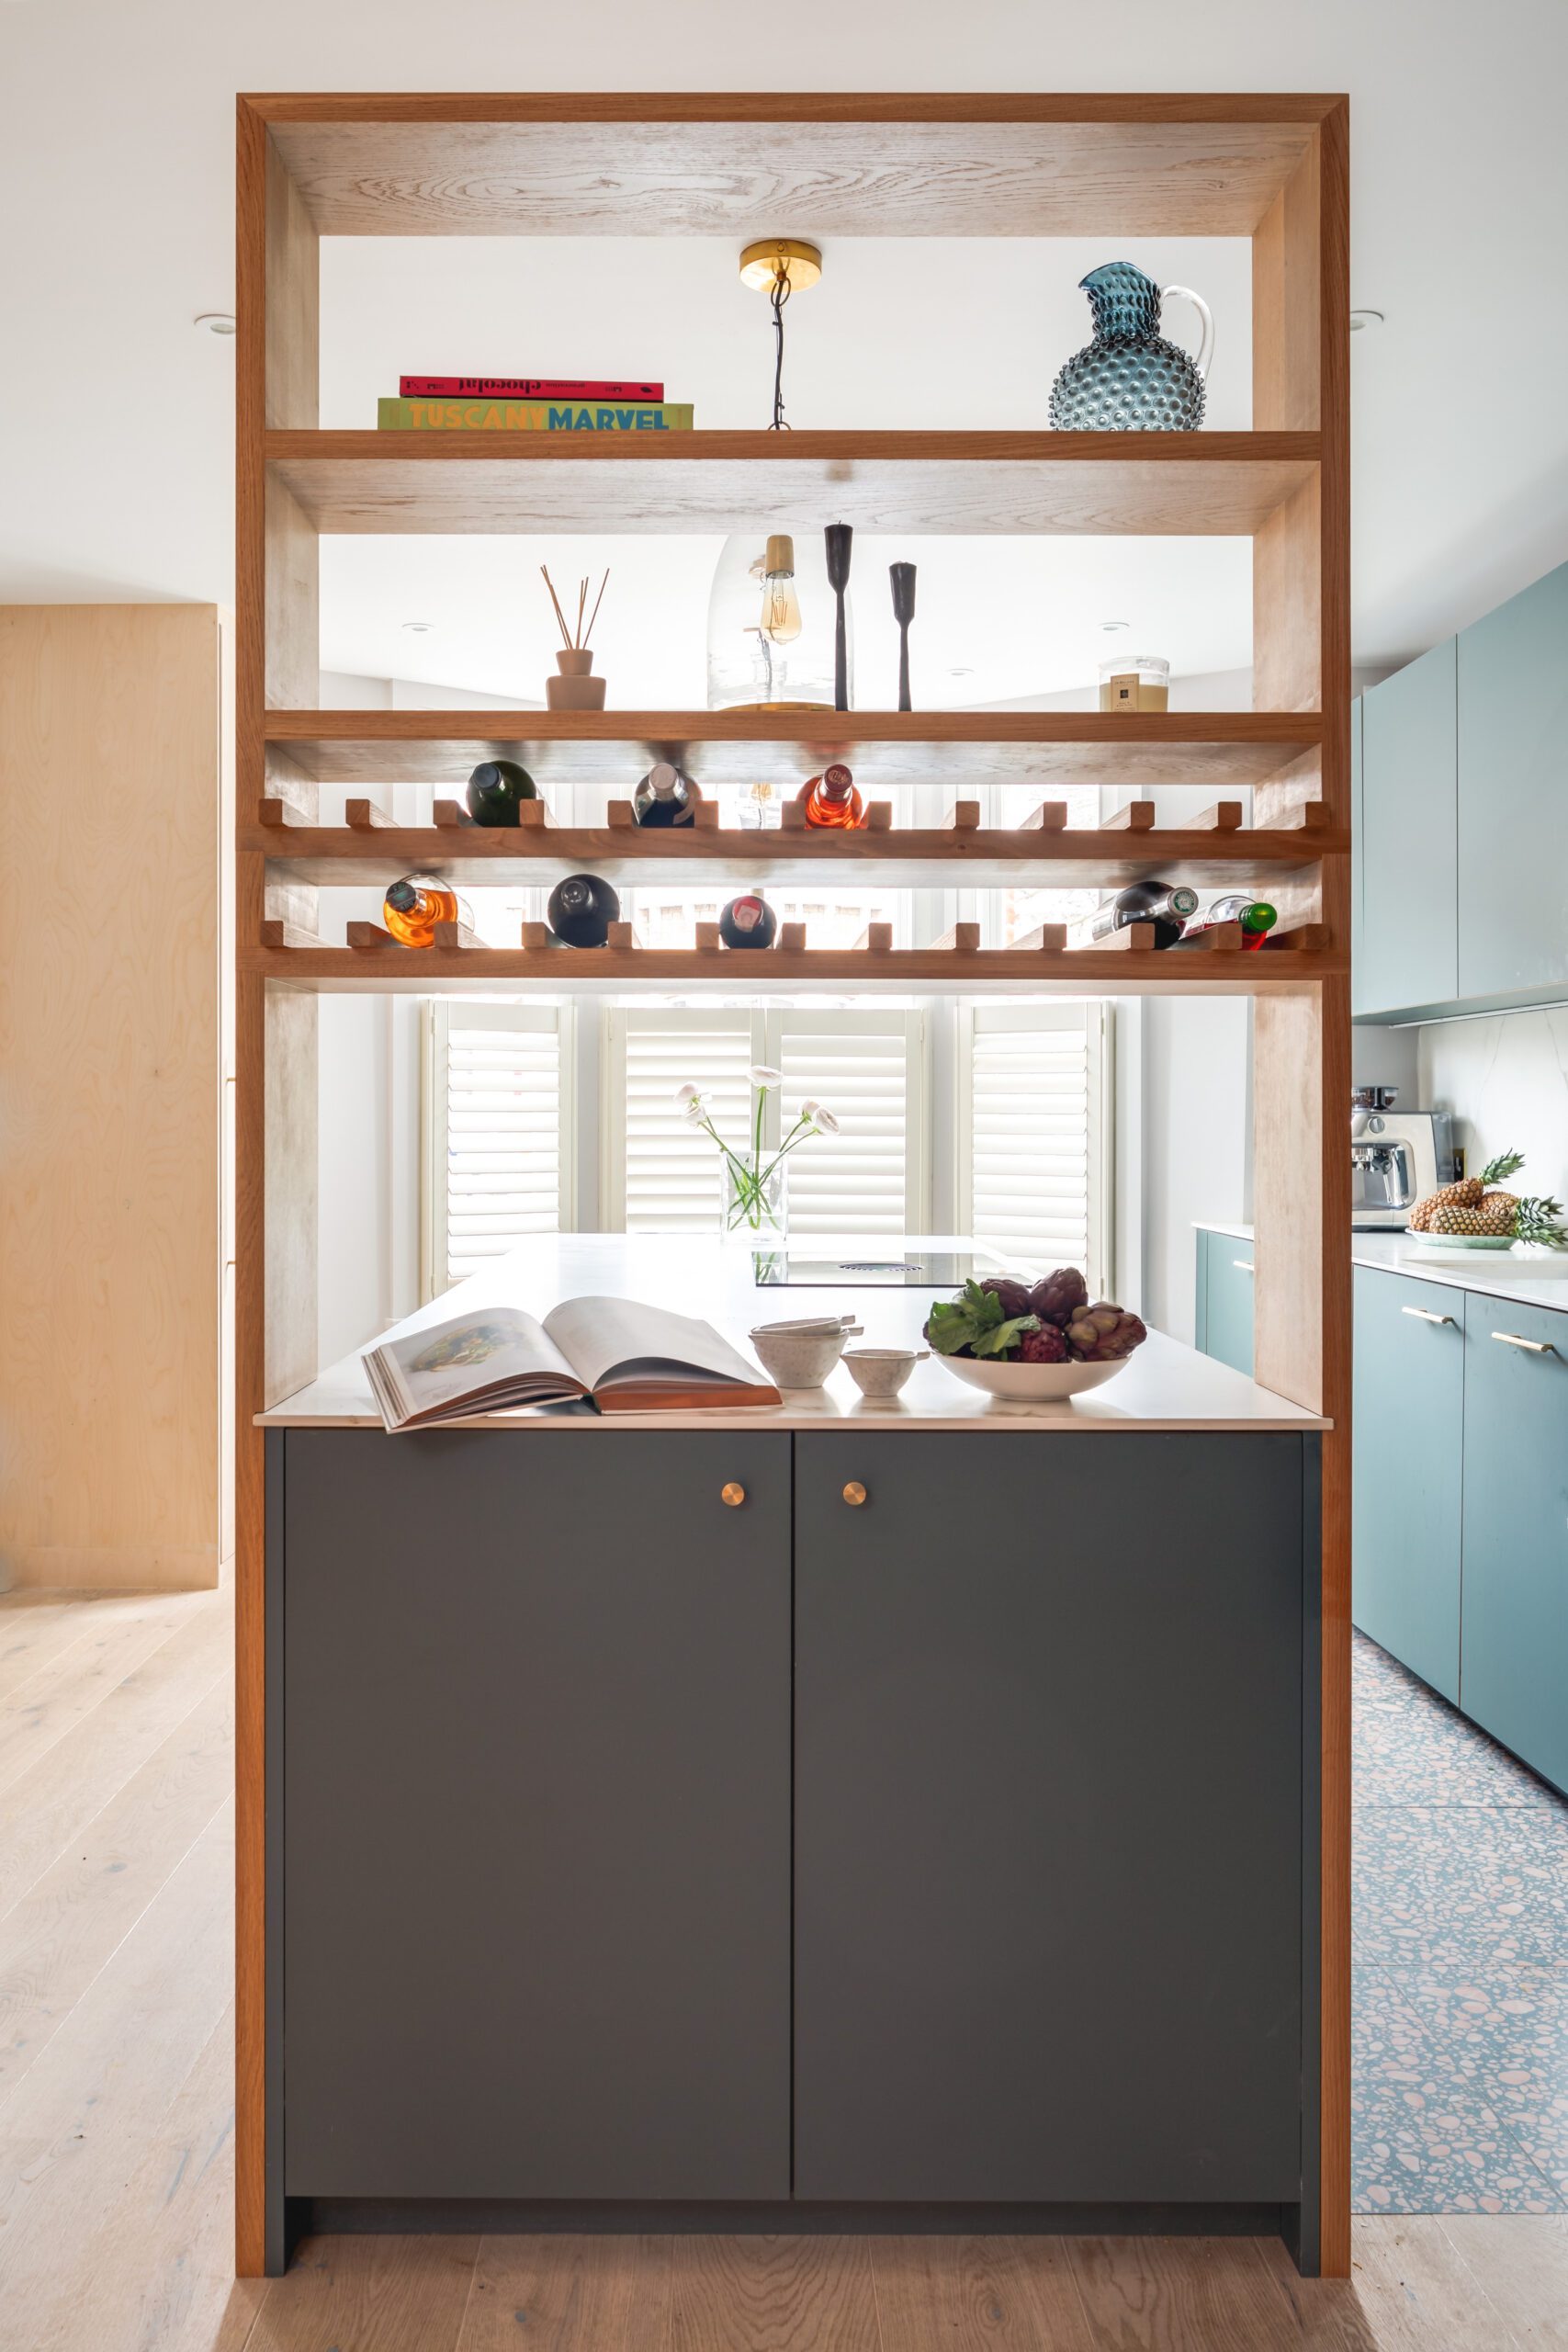 Made By HUSK's East Dulwich Kitchen case study featuring kitchen fronts in Fenix Verde Comodoro.